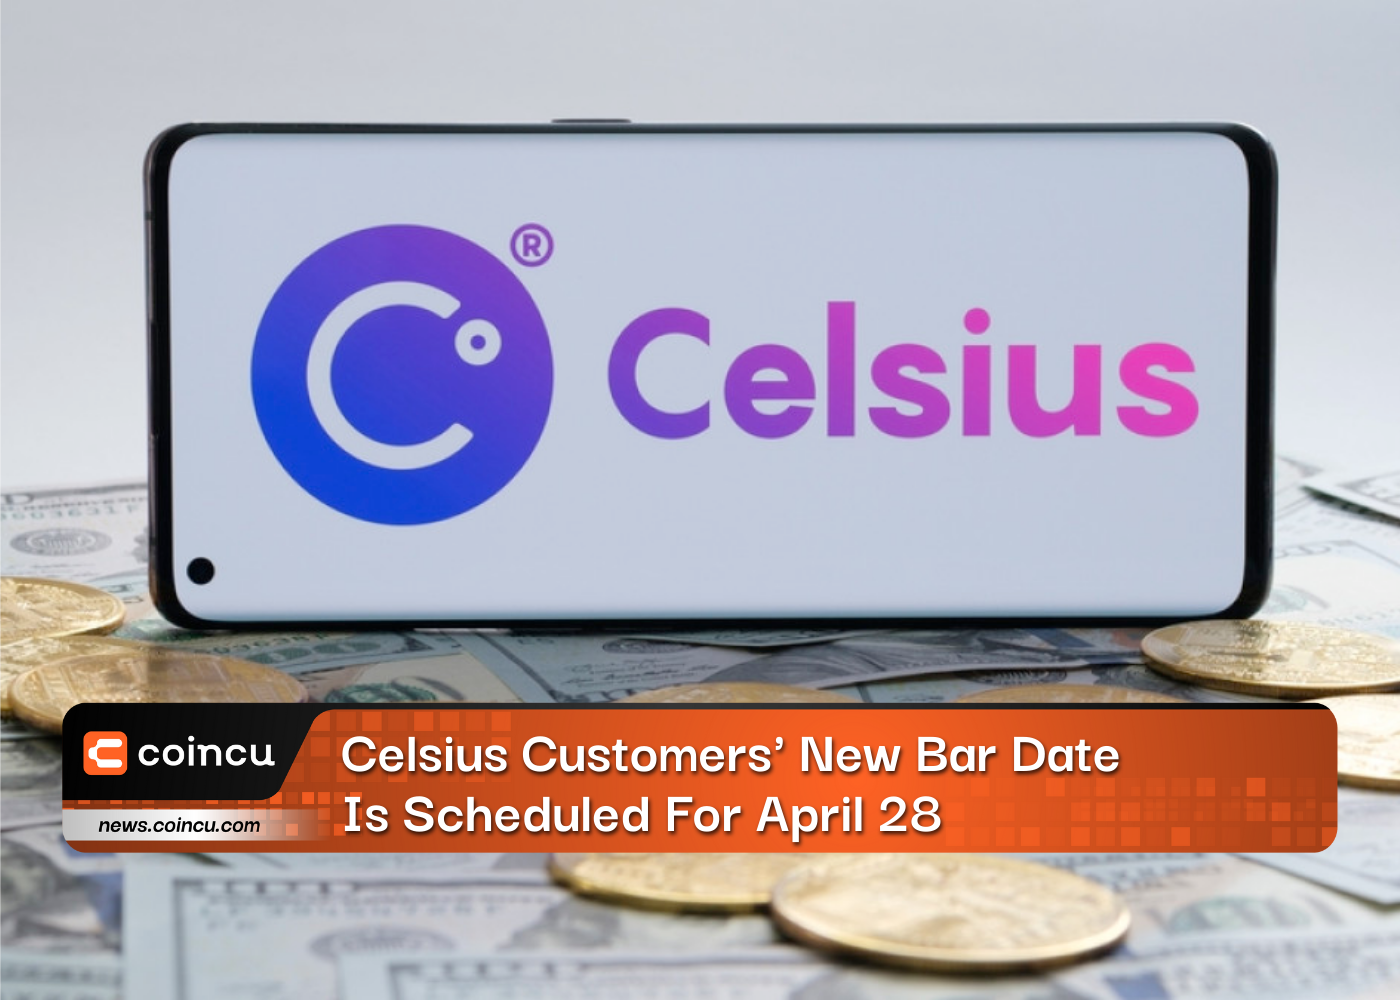 Celsius Customers' New Bar Date Is Scheduled For April 28